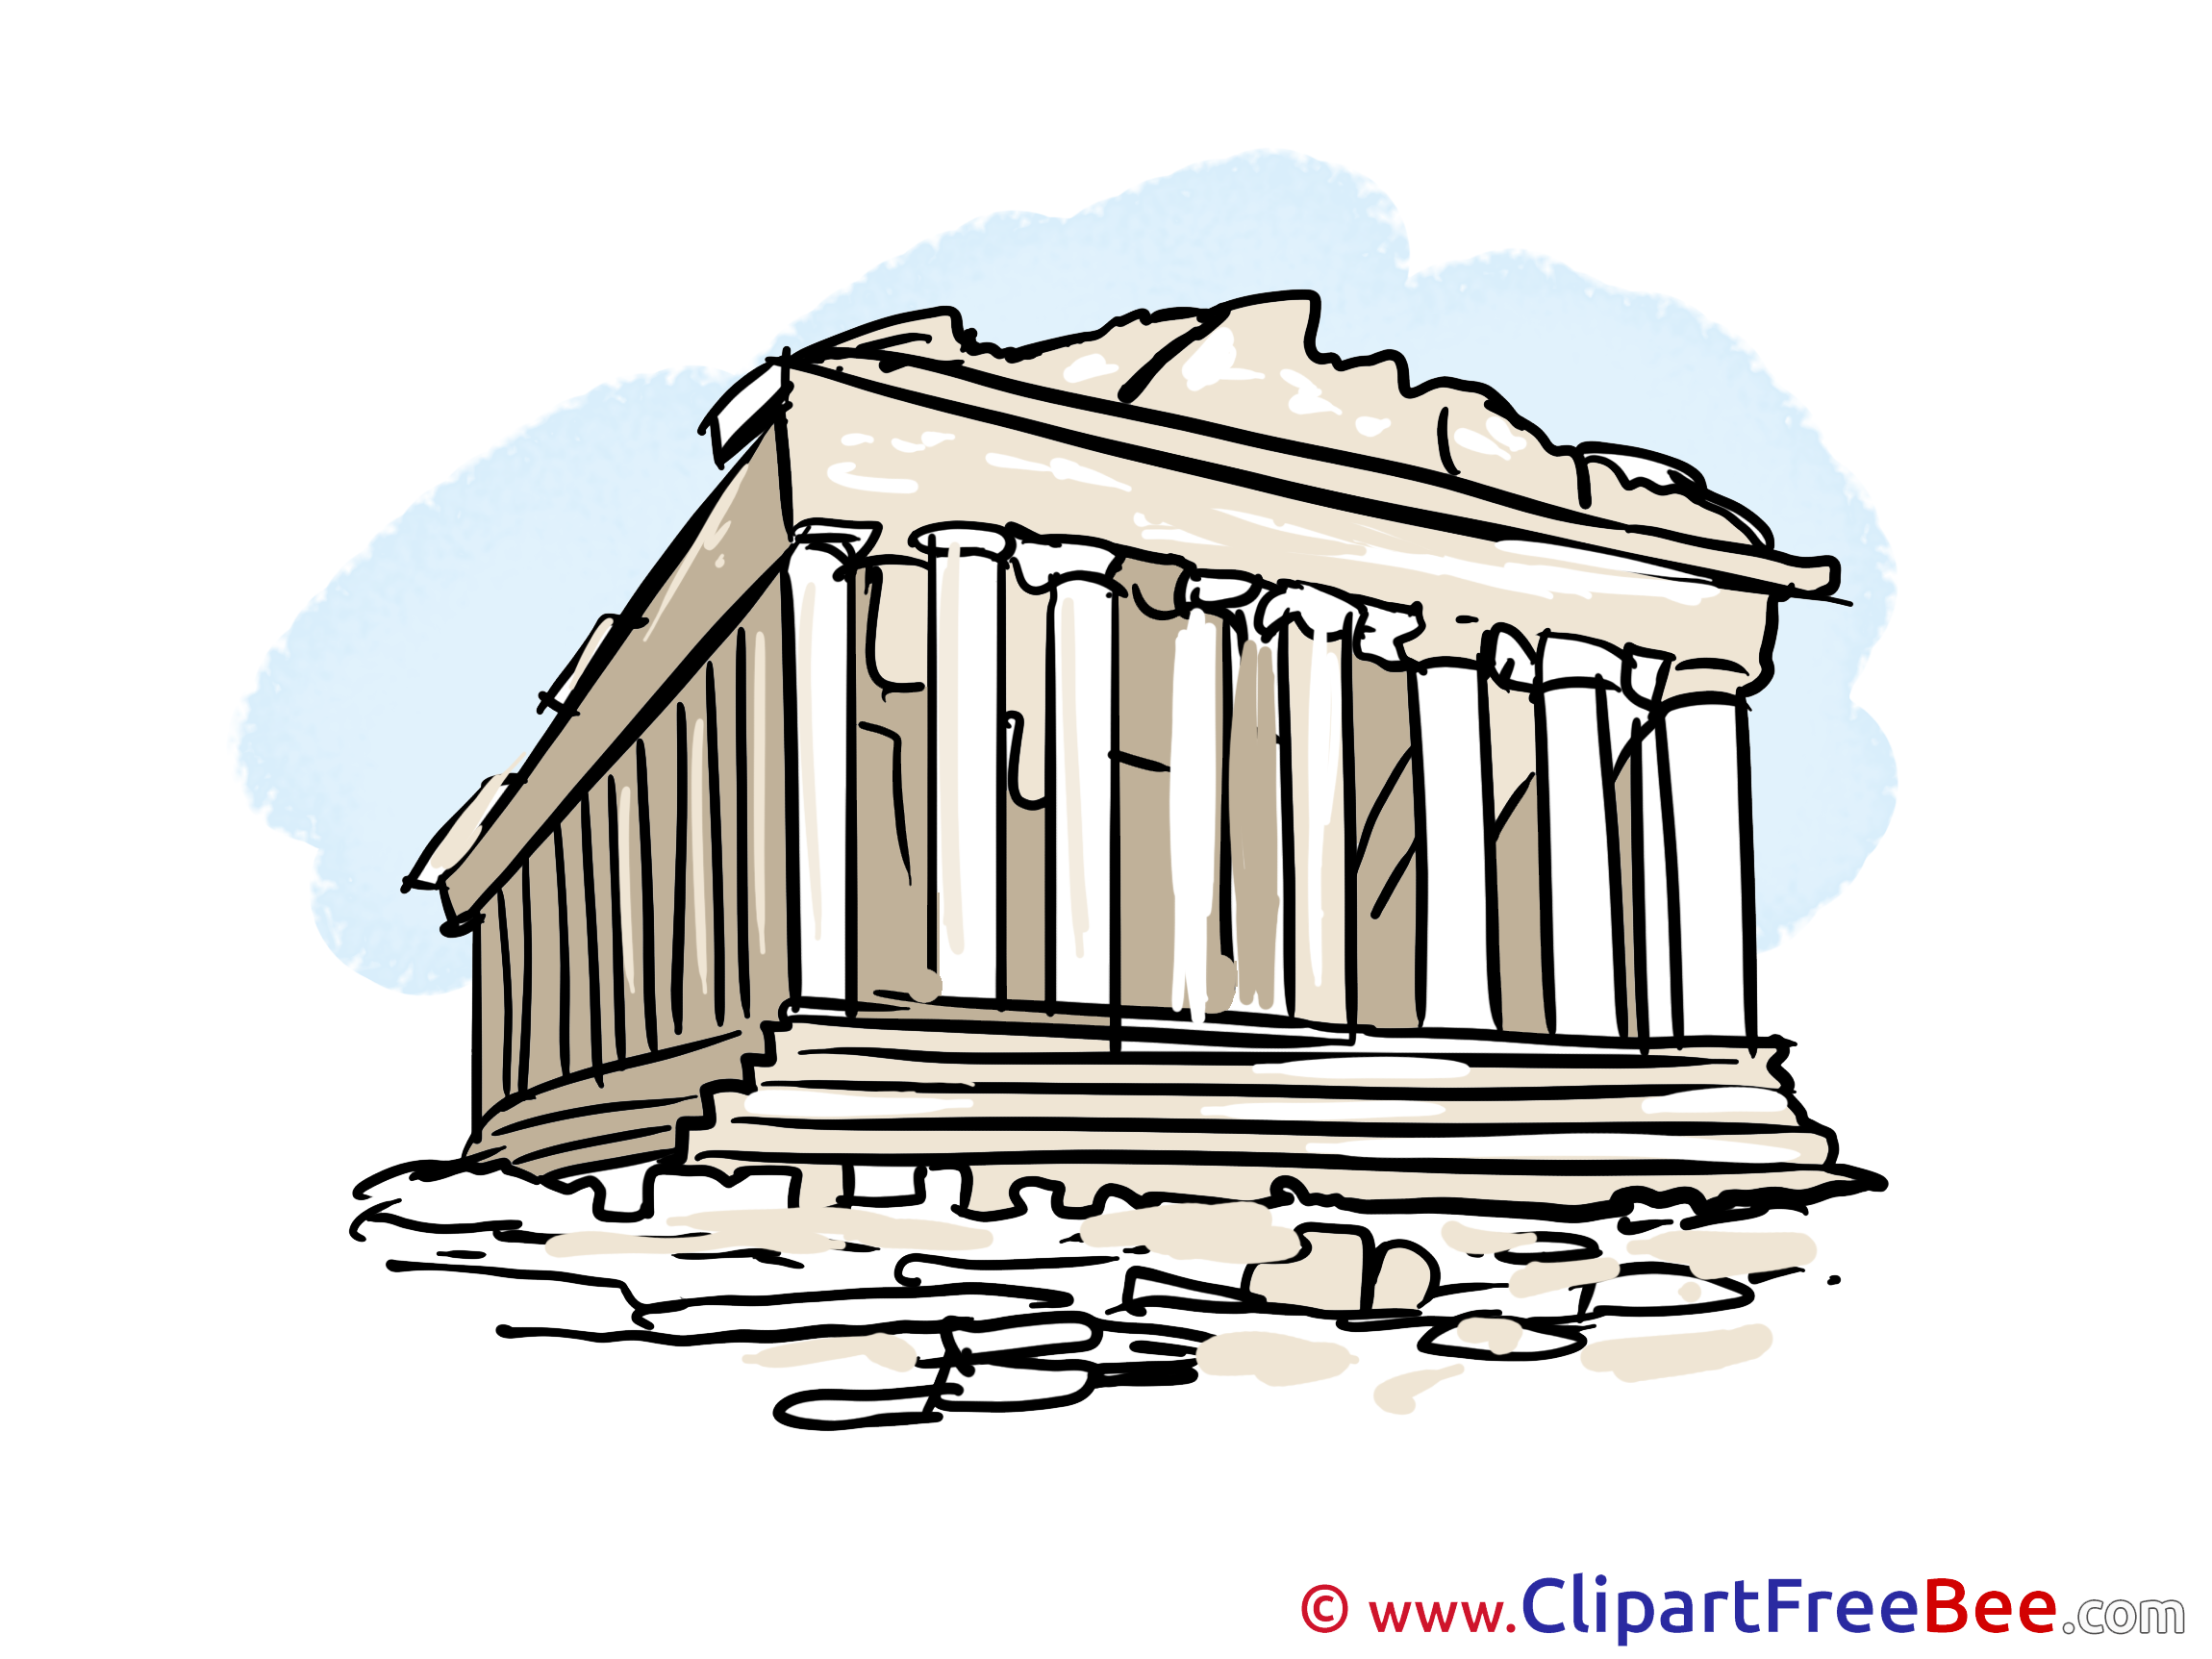 Greece clipart greek architecture - Pencil and in color greece ...